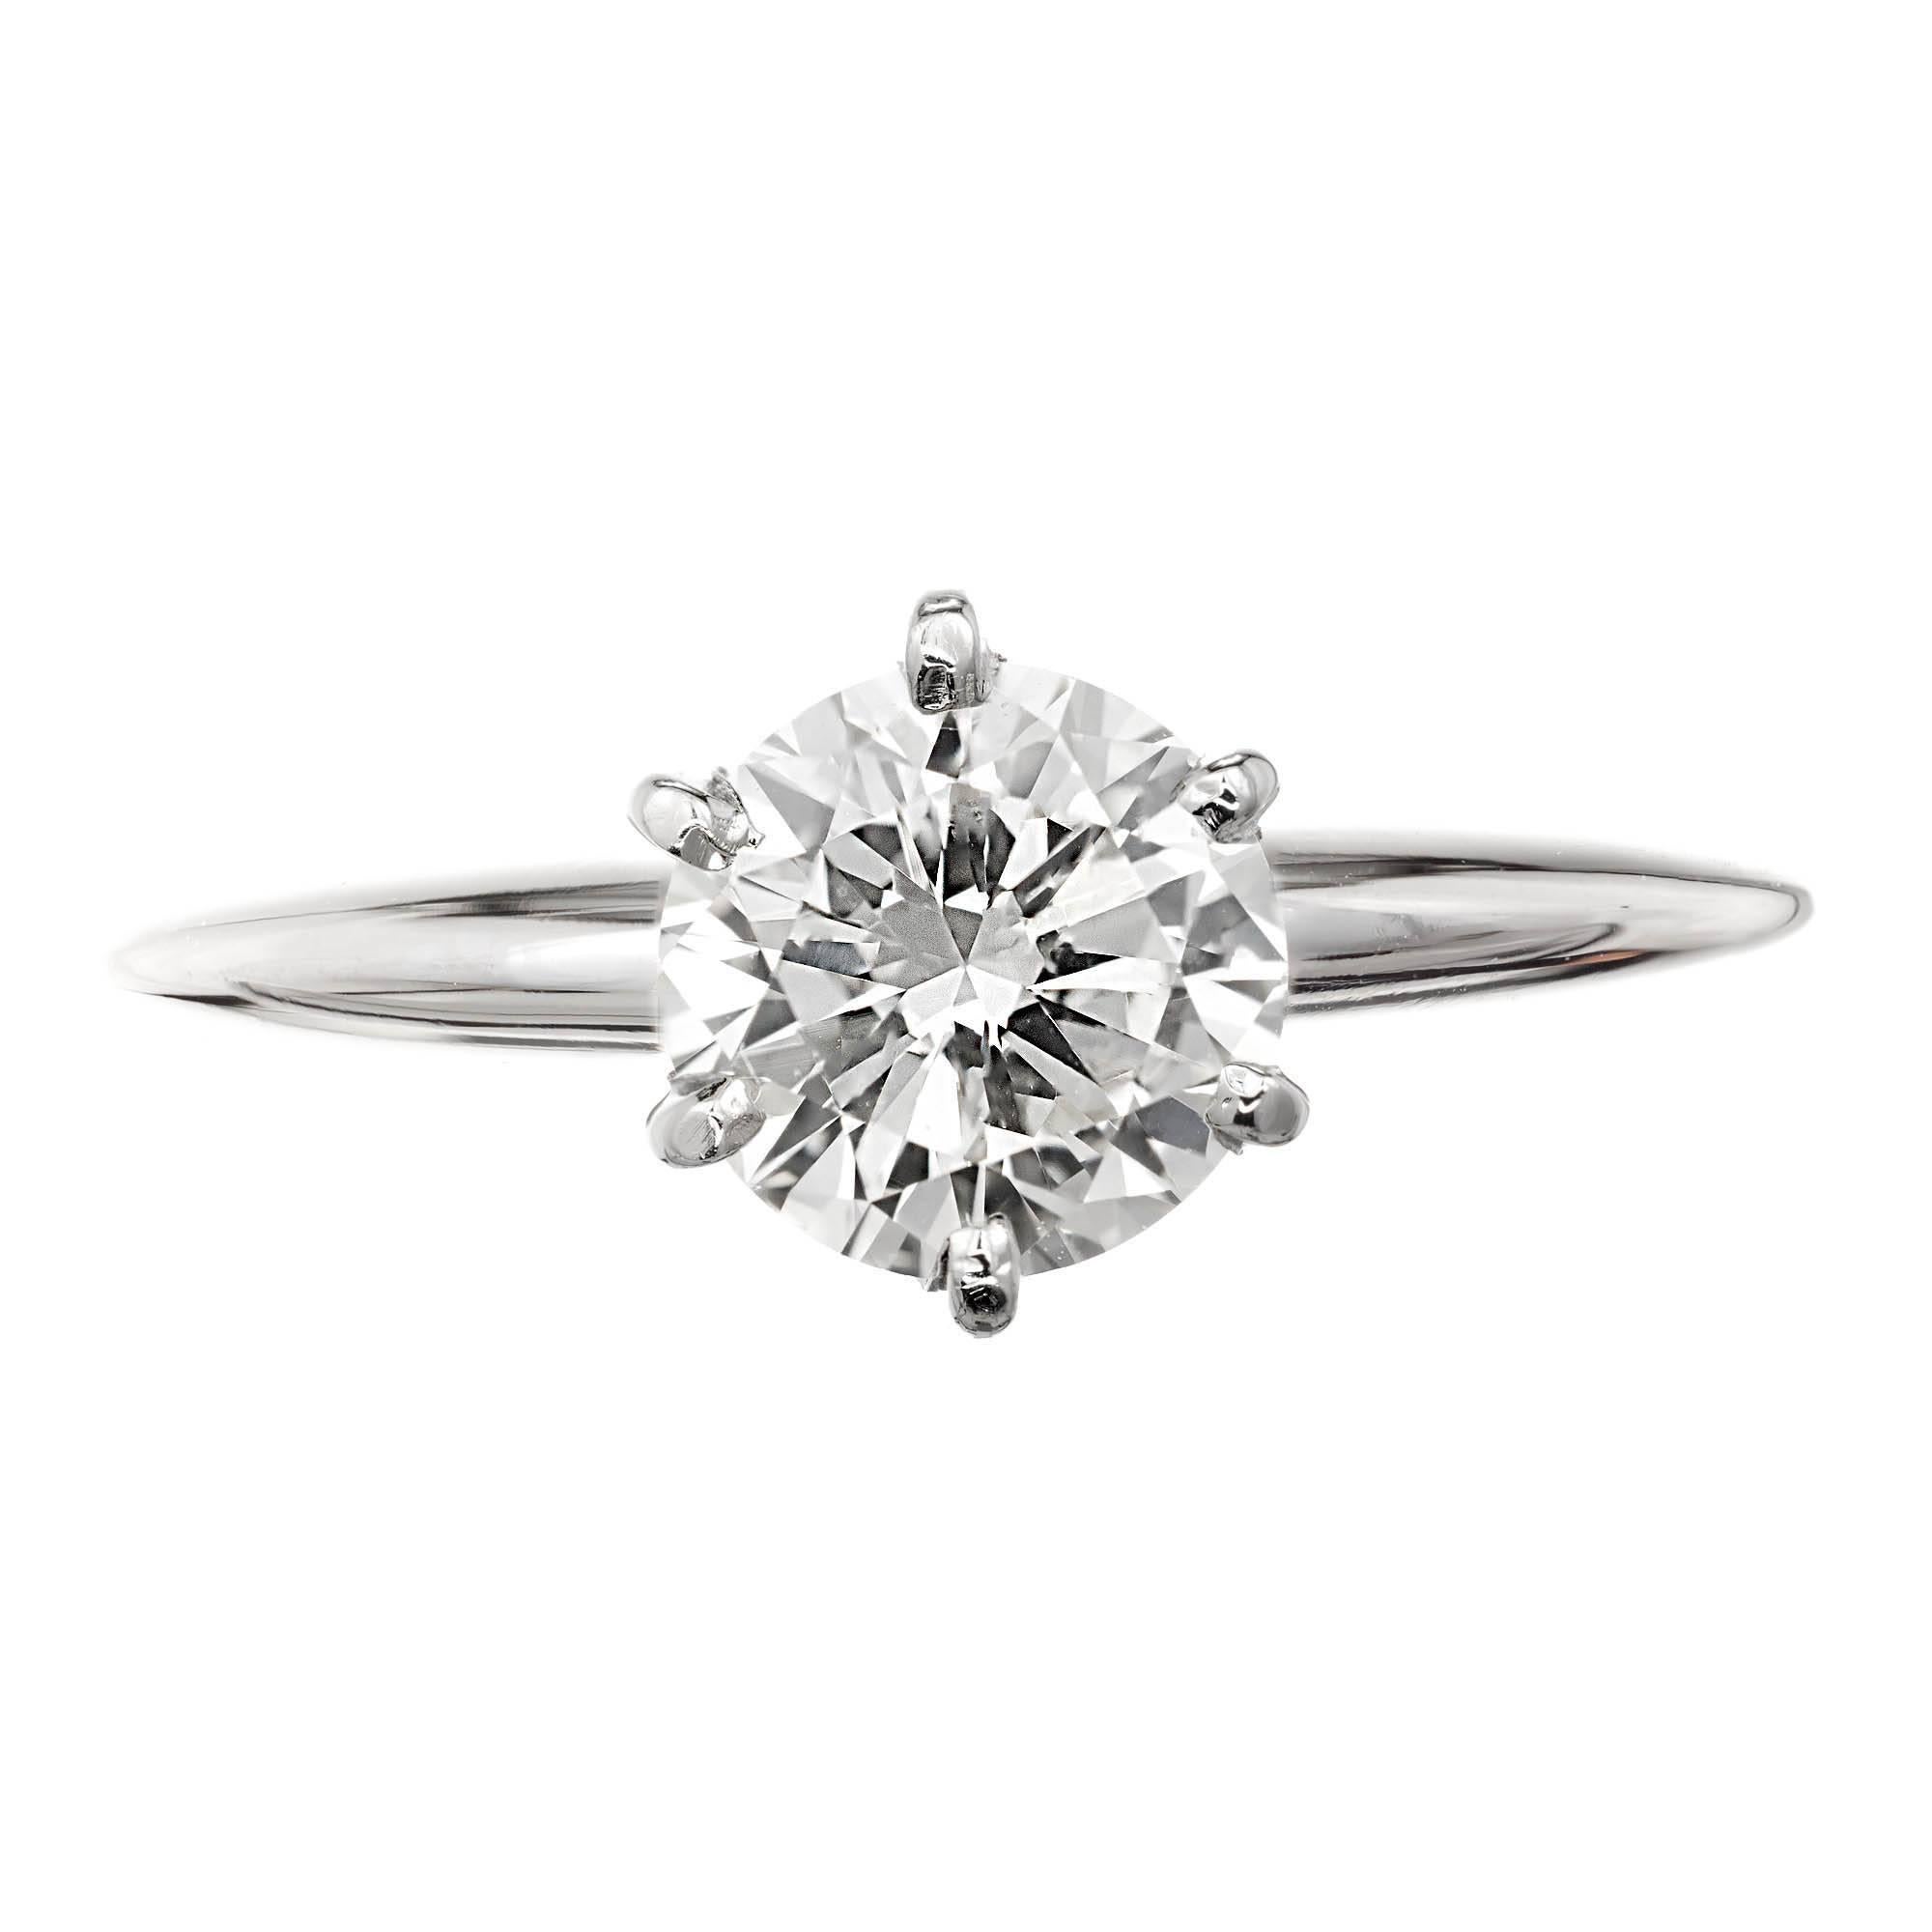 1.00ct Round Diamond 14k white gold solitaire engagement ring.  EGL certified Q-R, VS1


1.00 Ct Q-R color, VS1 clarity, Depth: 58%, Table 61% EGL certificate # US64065704D
Size 6.25 and sizable
Width at top: 8mm
Height at top: 7mm
Width at bottom: